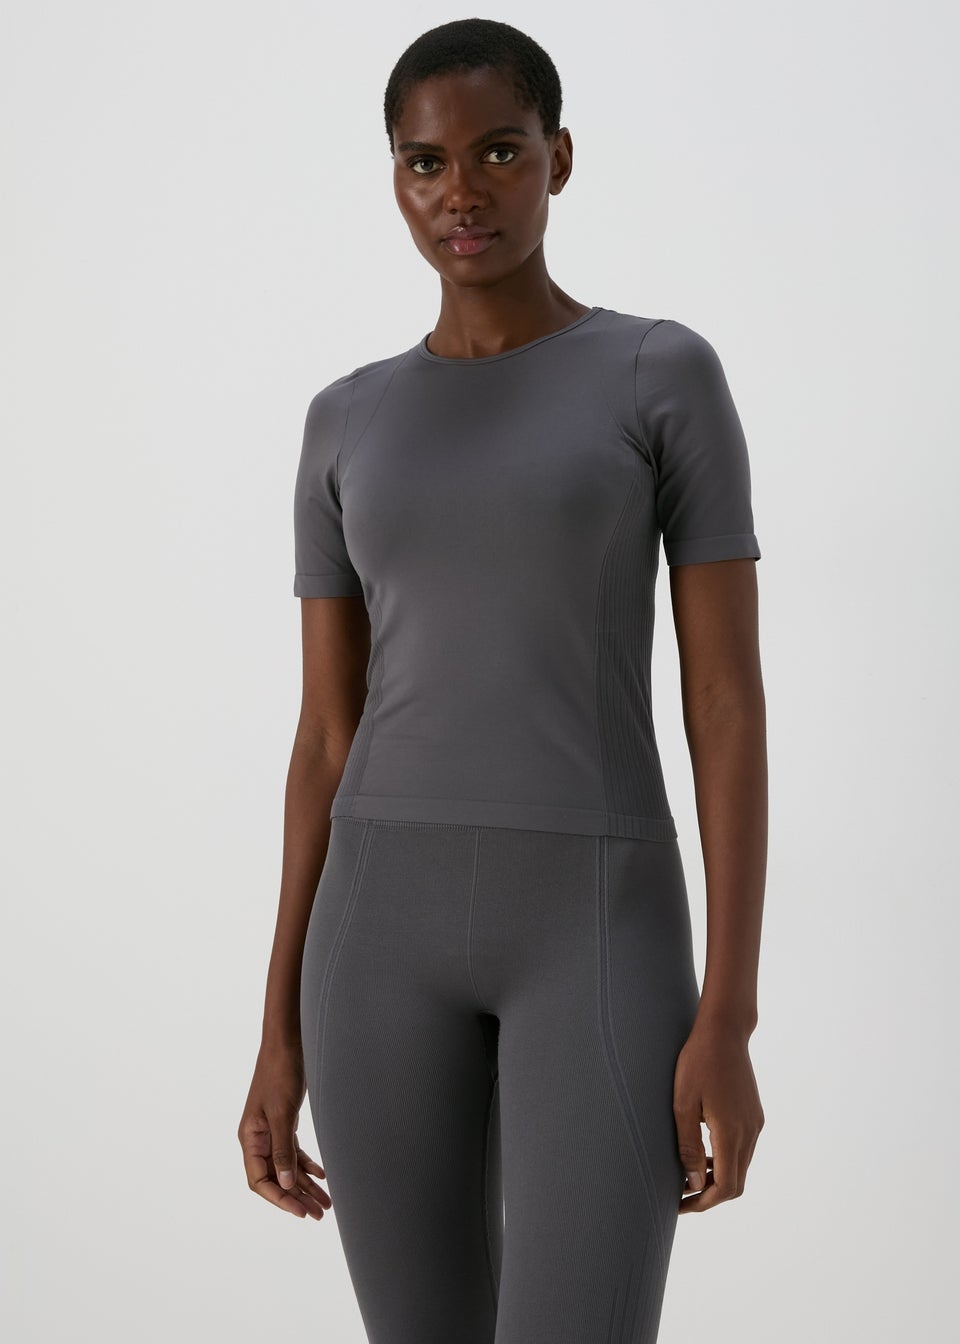 Souluxe Charcoal Seam Free Top